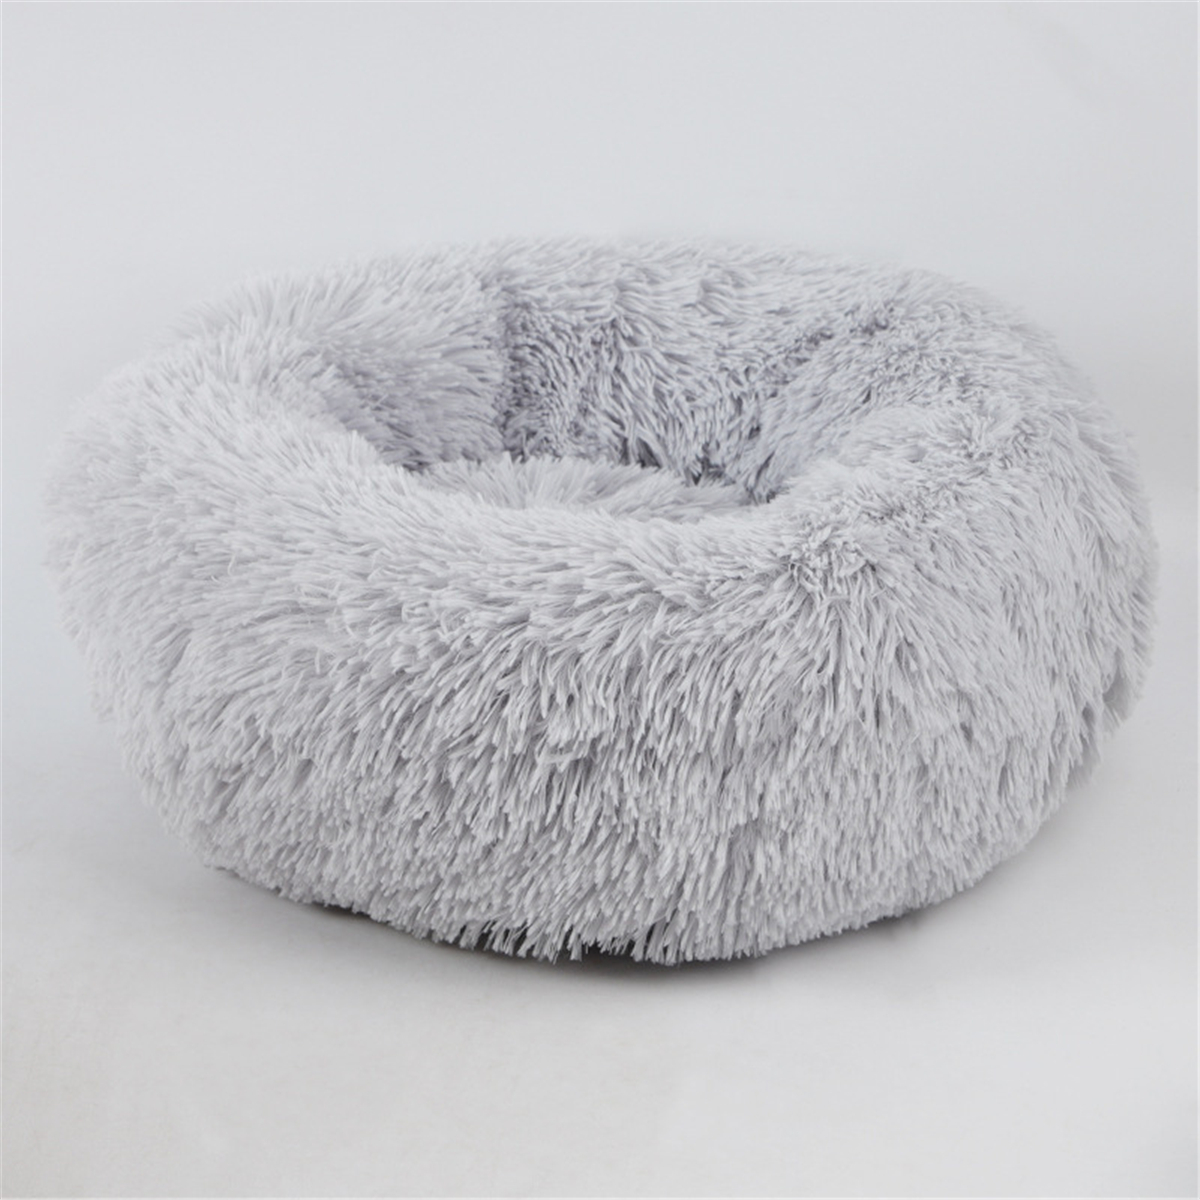 4-Size-Dog-Cat-Round-Bed-Sleeping-Bed-Plush-Pet-Bed-Kennel-Sleeping-Cushion-Puppy-1475650-3